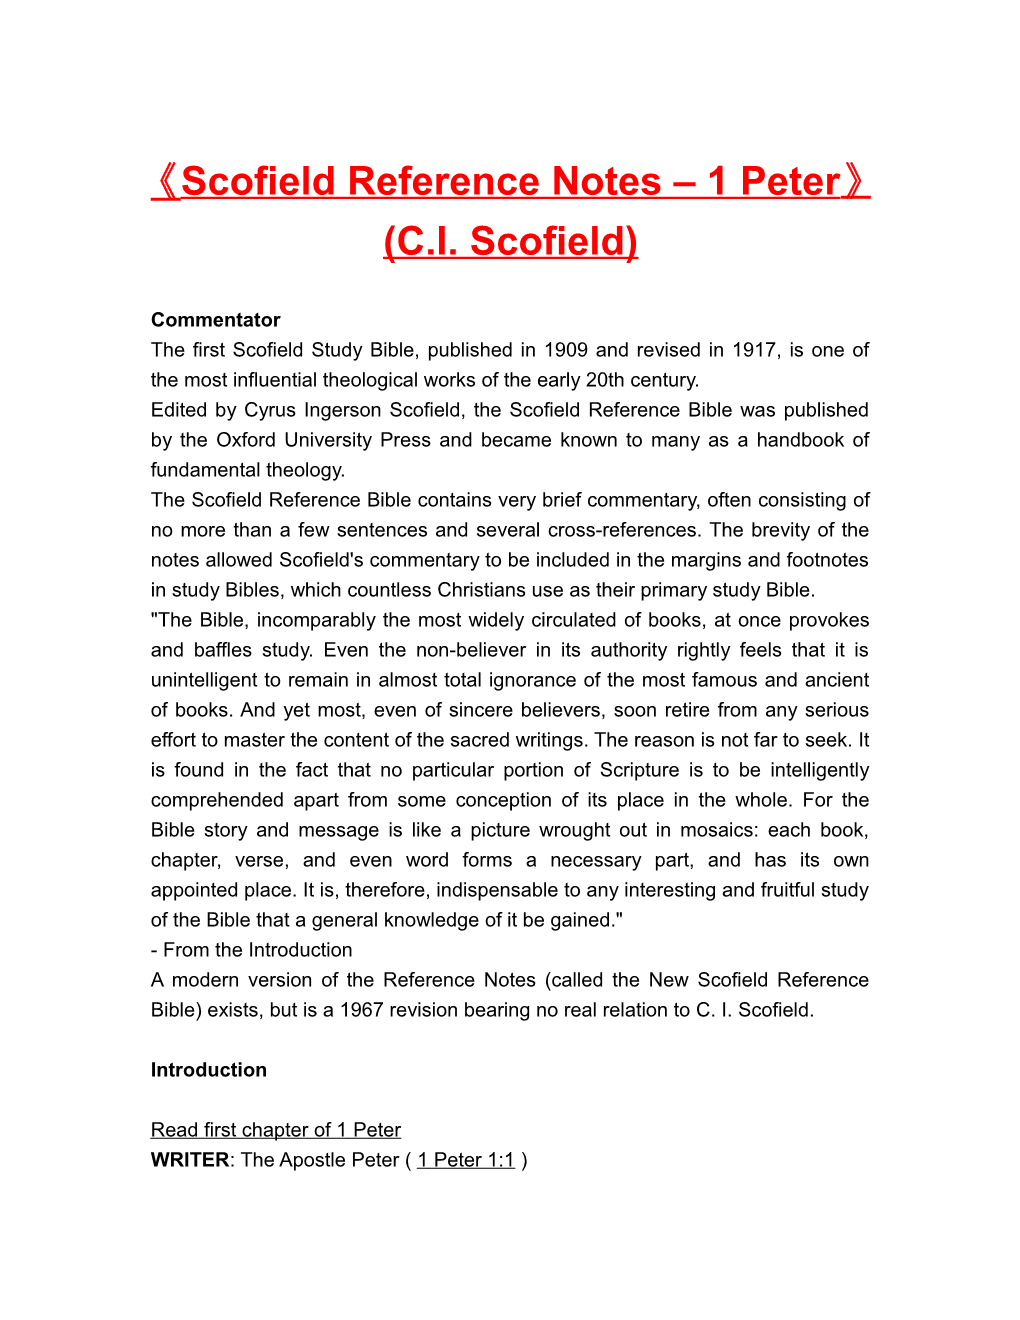 Scofield Reference Notes 1 Peter (C.I. Scofield)